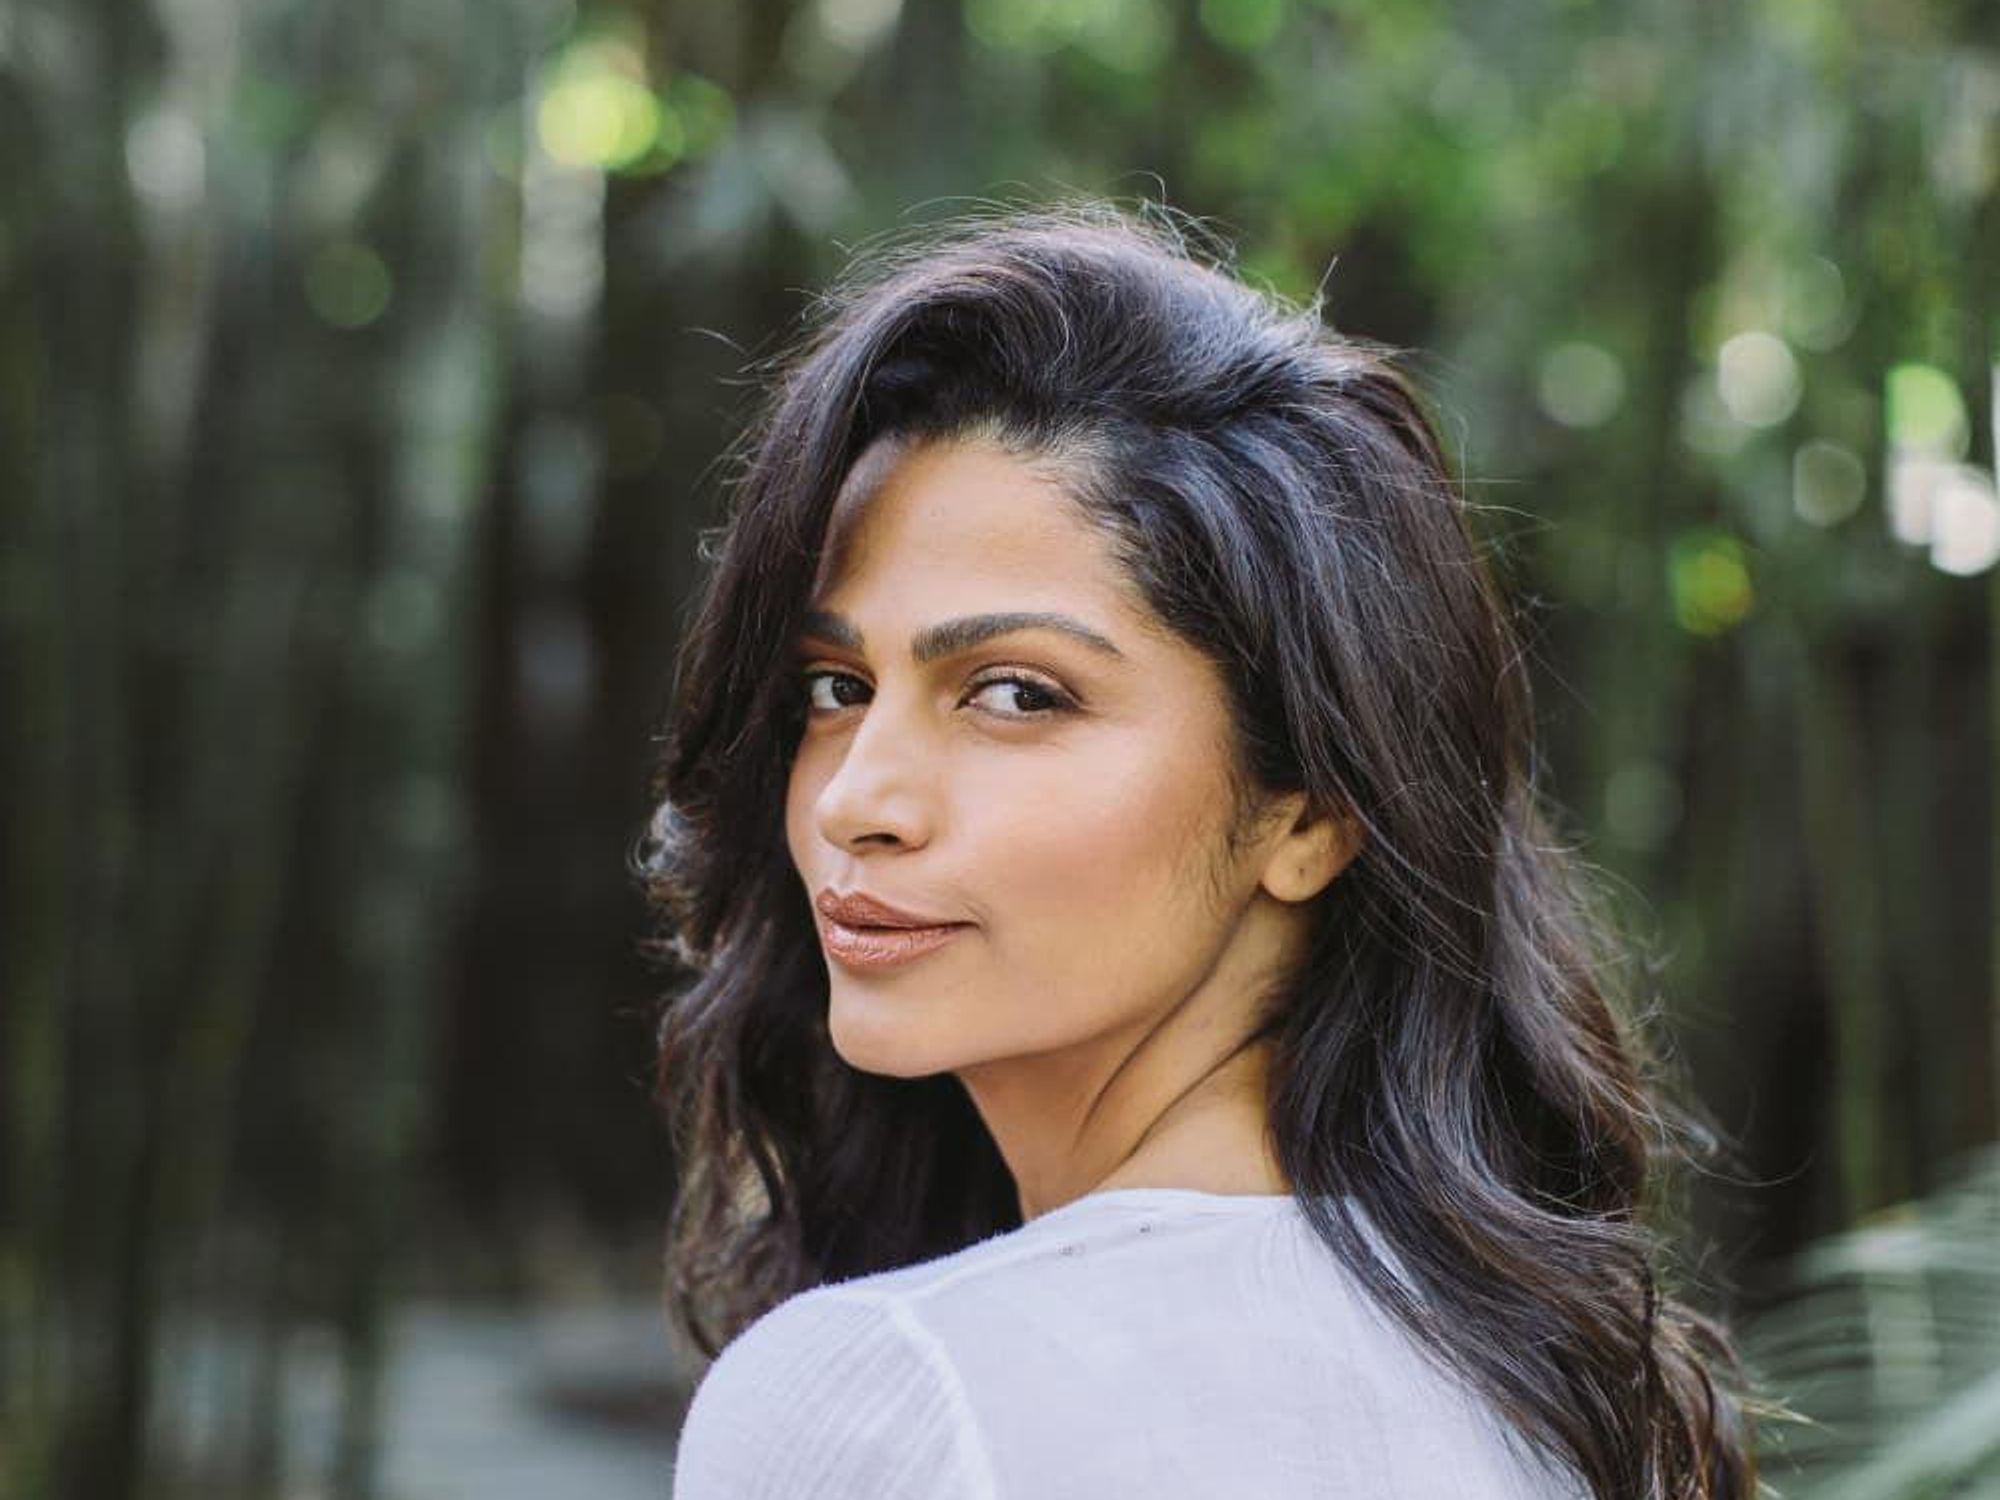 Camila Alves McConaughey is a Brazilian-born model, entrepreneur, designer, dedicated mother, healthy eating advocate, and wife of Matthew McConaughey,